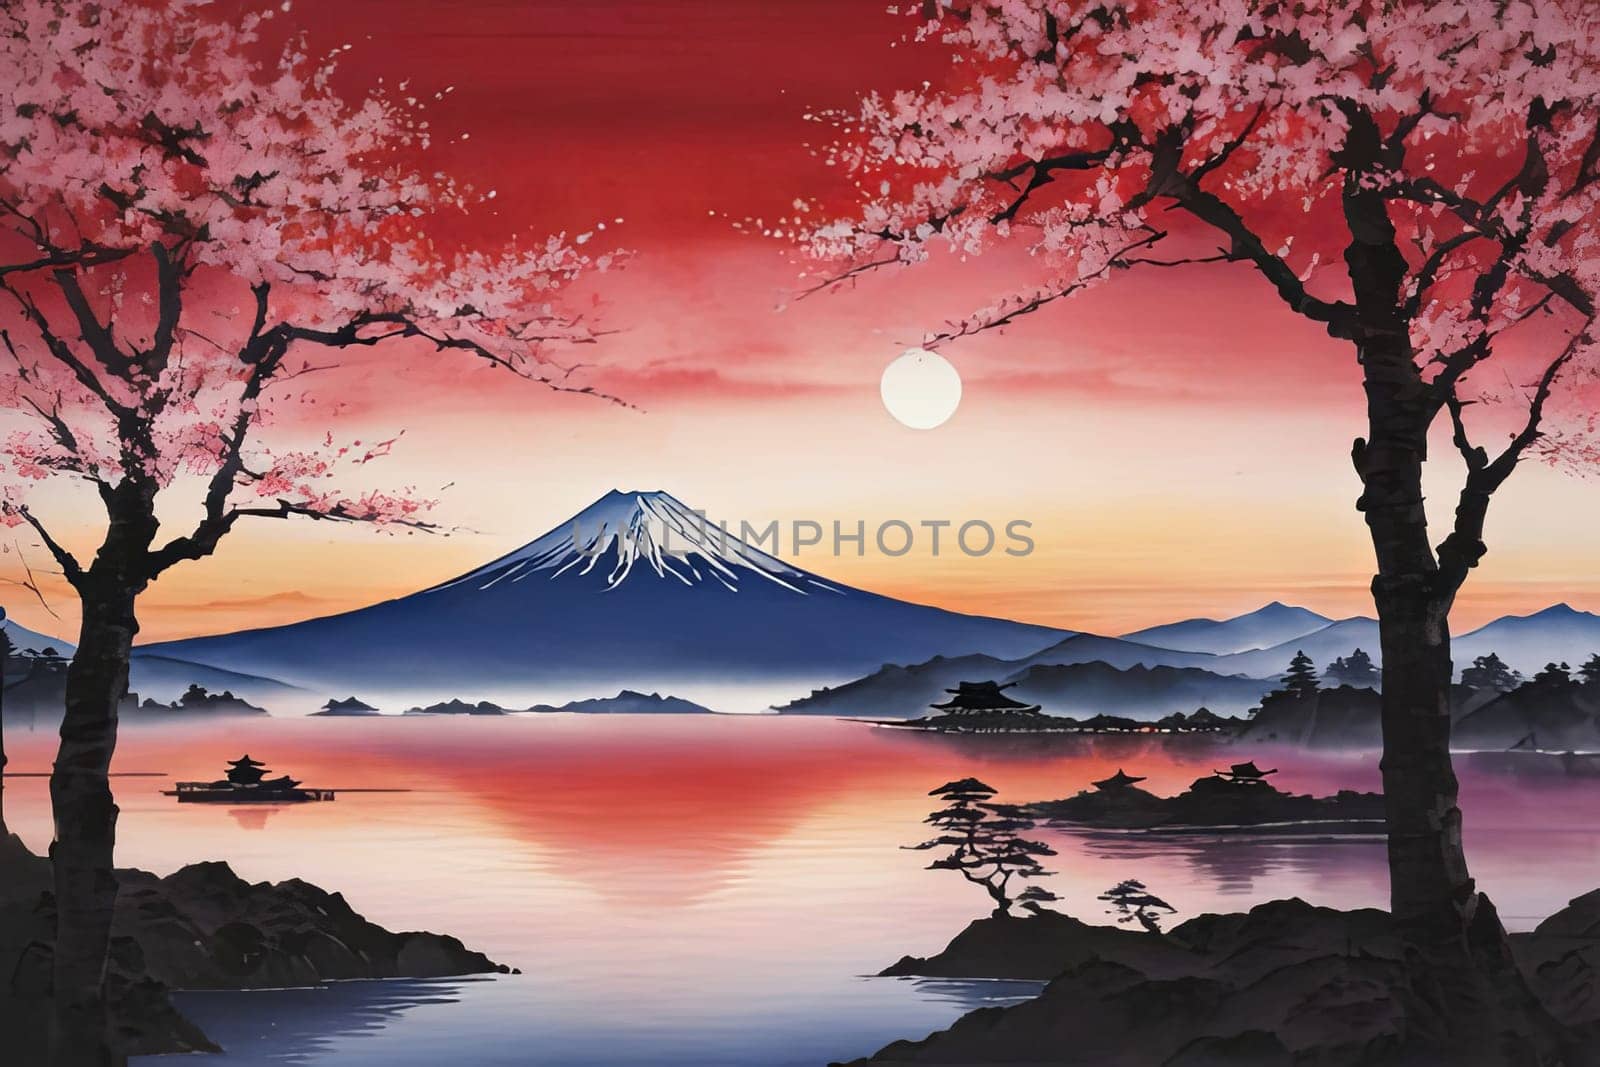 Mount Fuji range with red tree in foreground. For meditation apps, on covers of books about spiritual growth, in designs for yoga studios, spa salons, illustration for articles on inner peace, print. by Angelsmoon